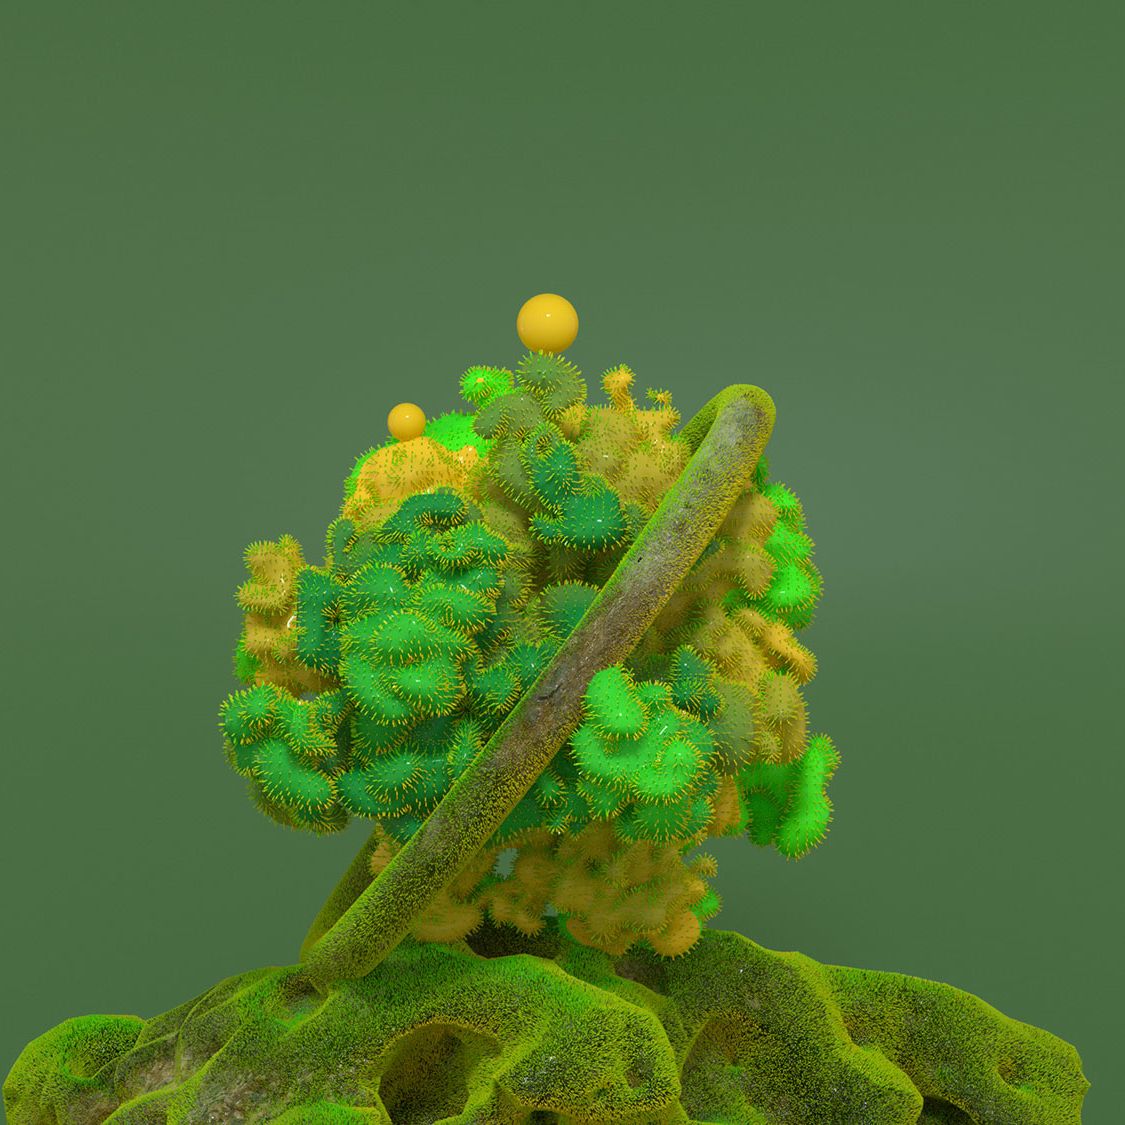 CAD image of green furry object with many textures on green background